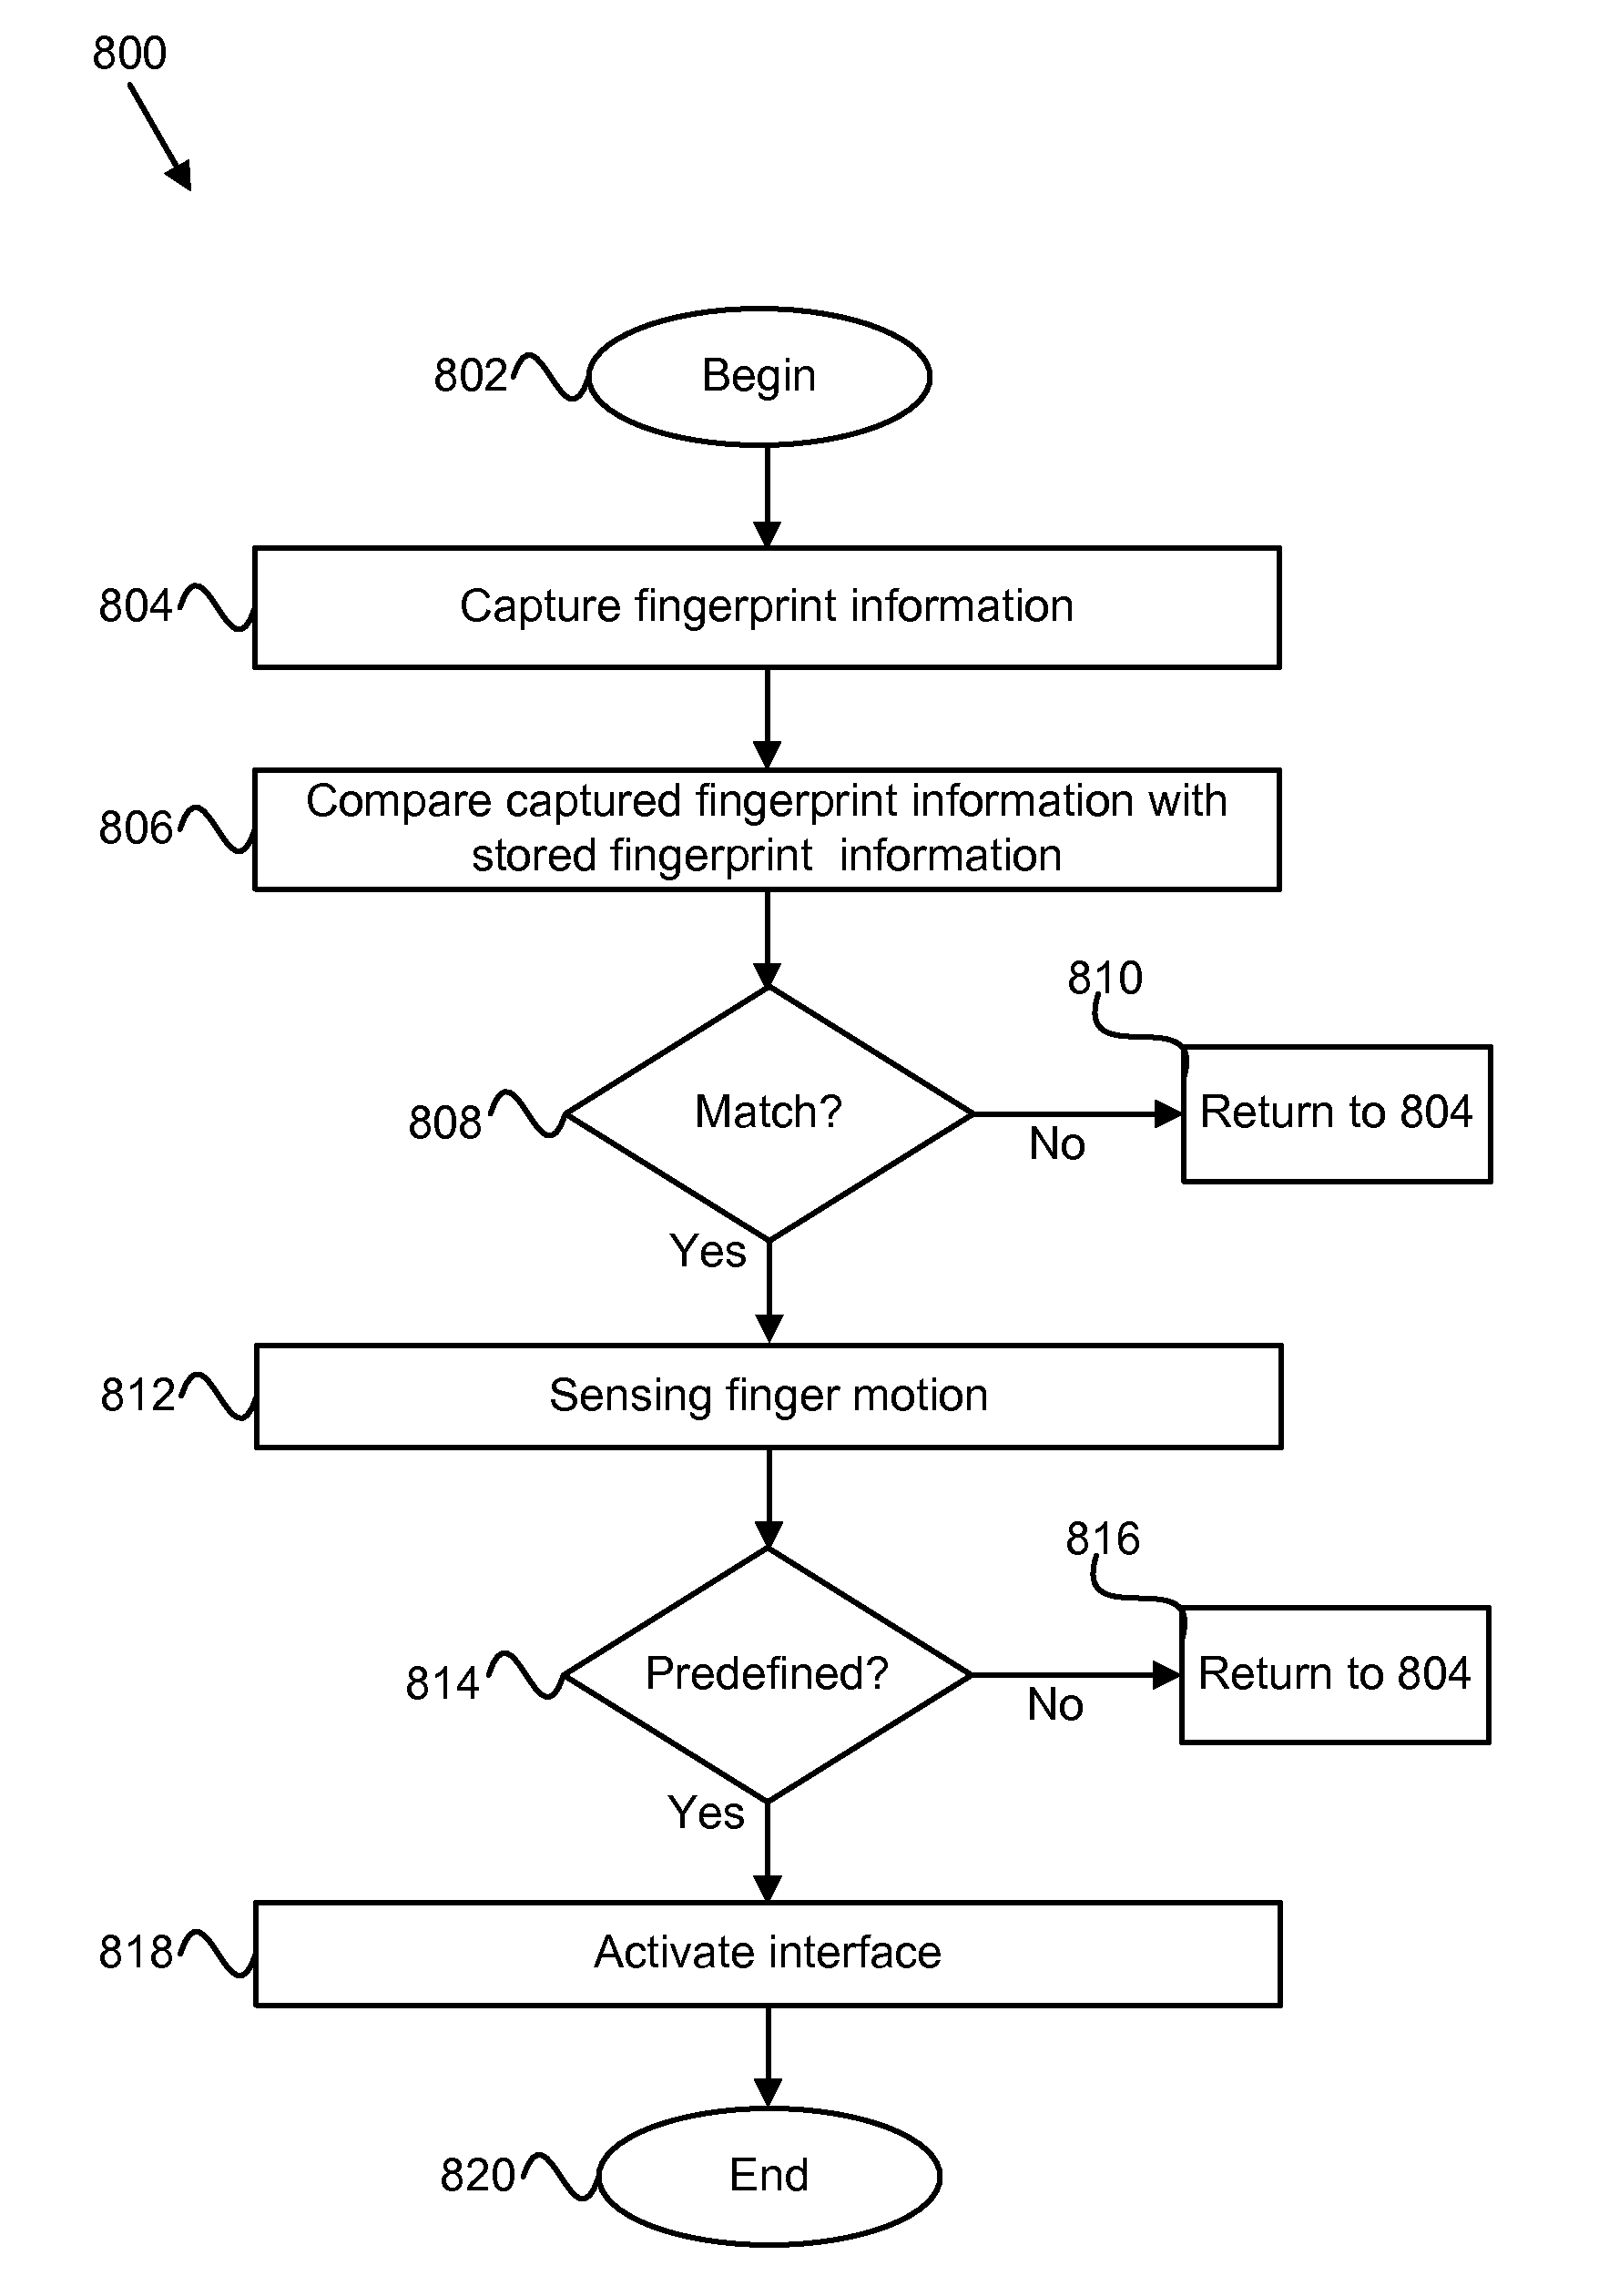 Apparatus, system, and method for providing authentication and activation functions to a computing device